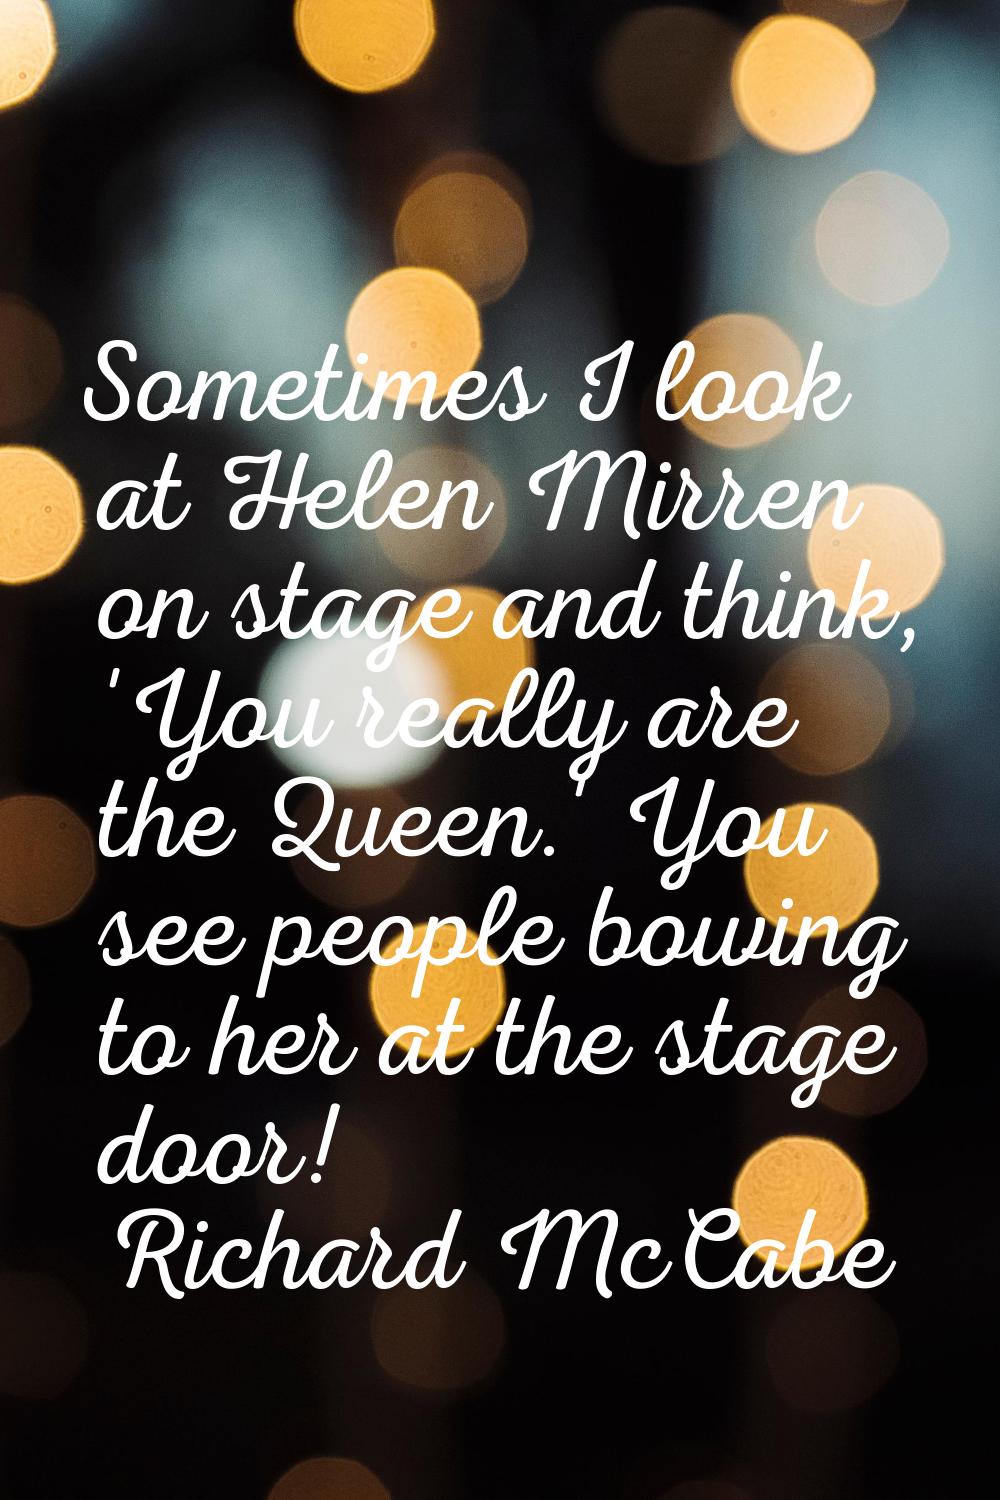 Sometimes I look at Helen Mirren on stage and think, 'You really are the Queen.' You see people bow